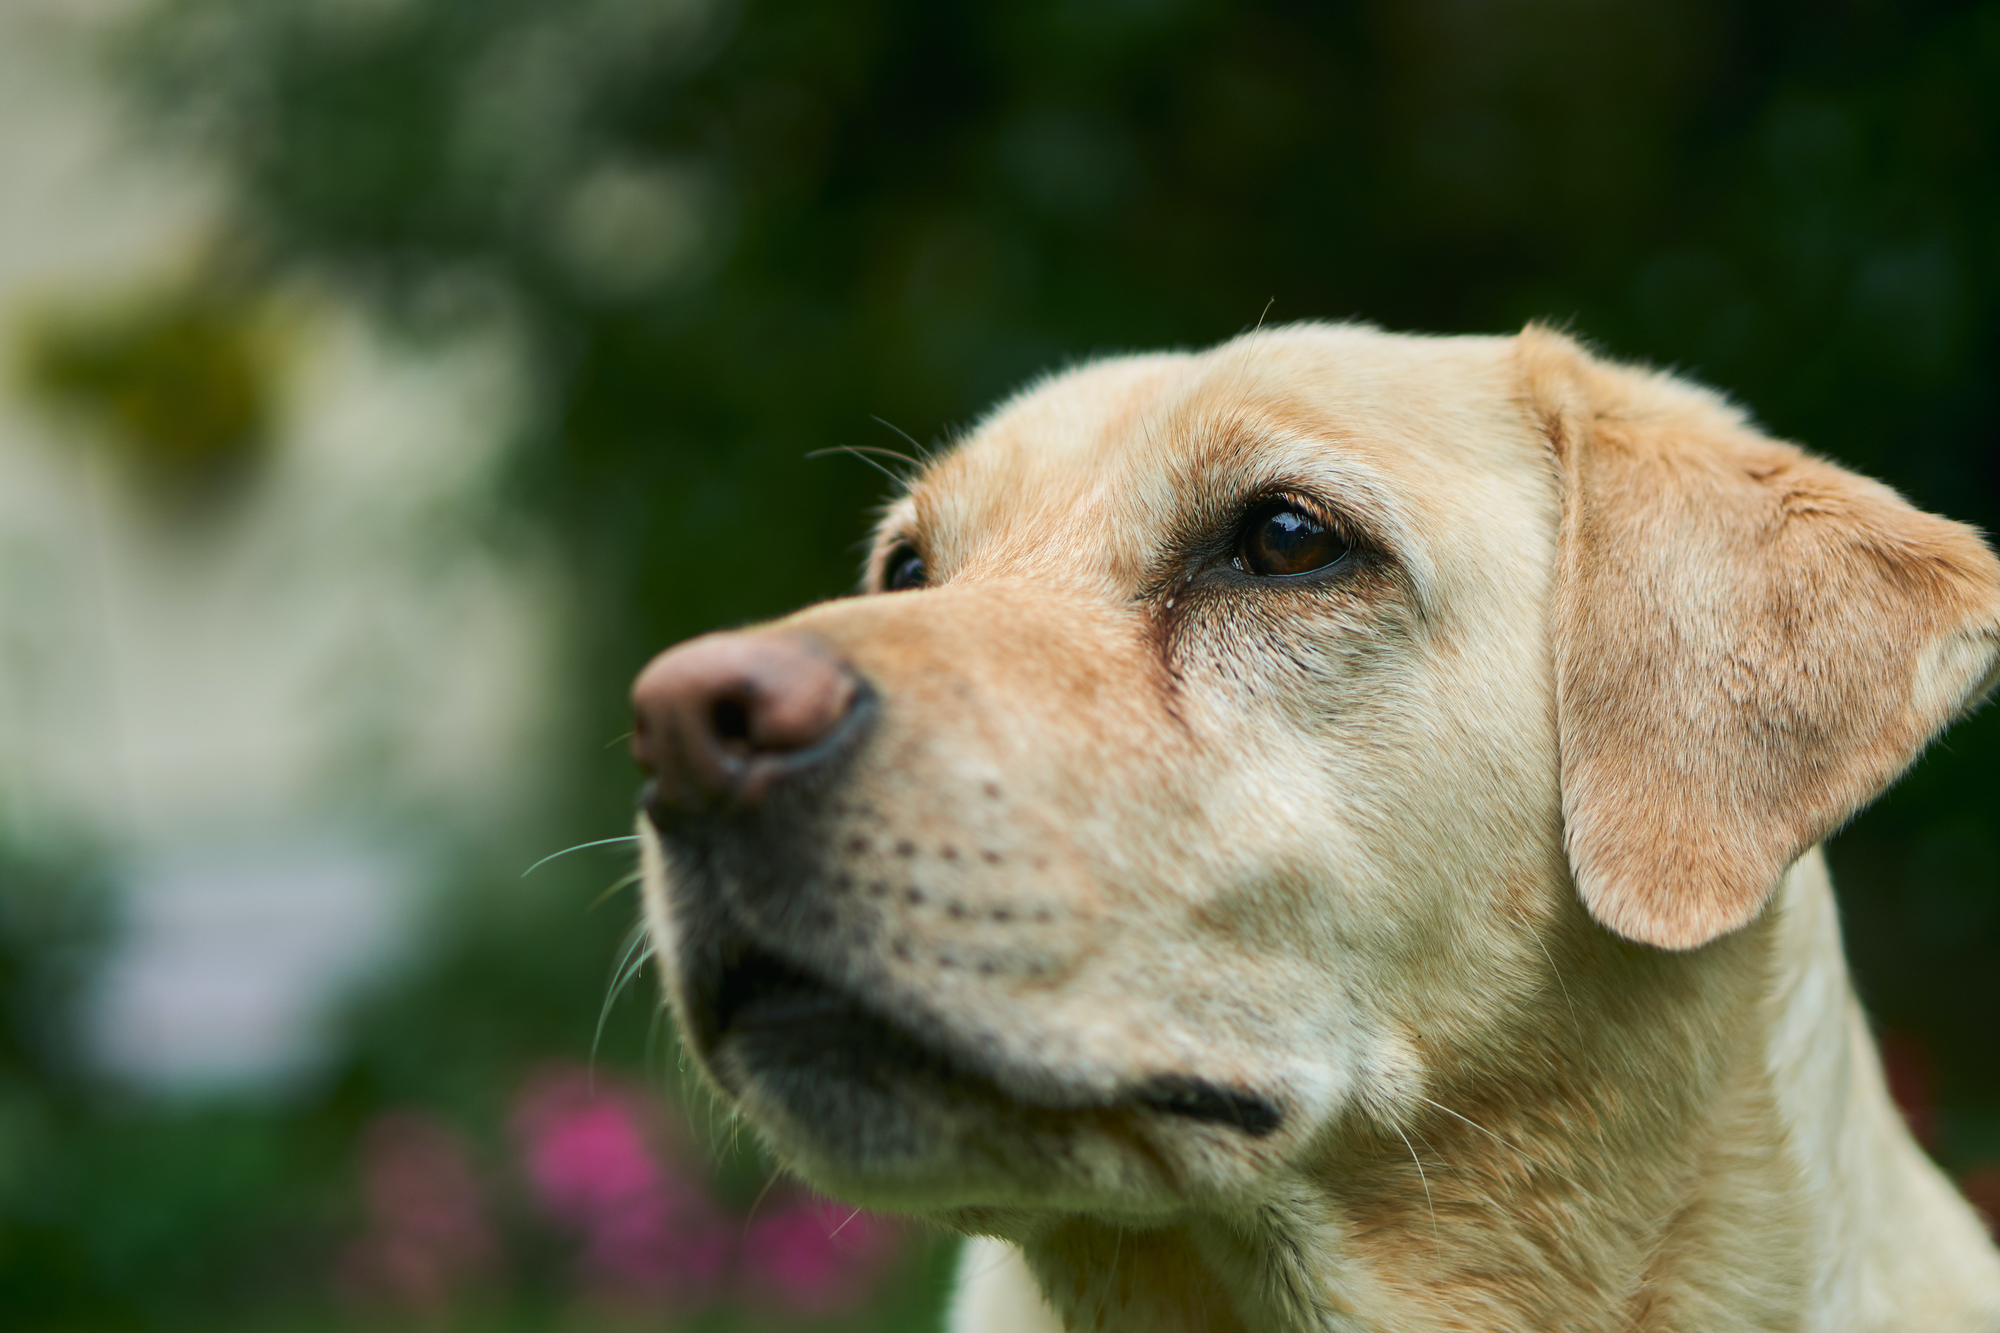 Senior Labrador Retrievers: Optimized Exercise Routines for Health and Happiness